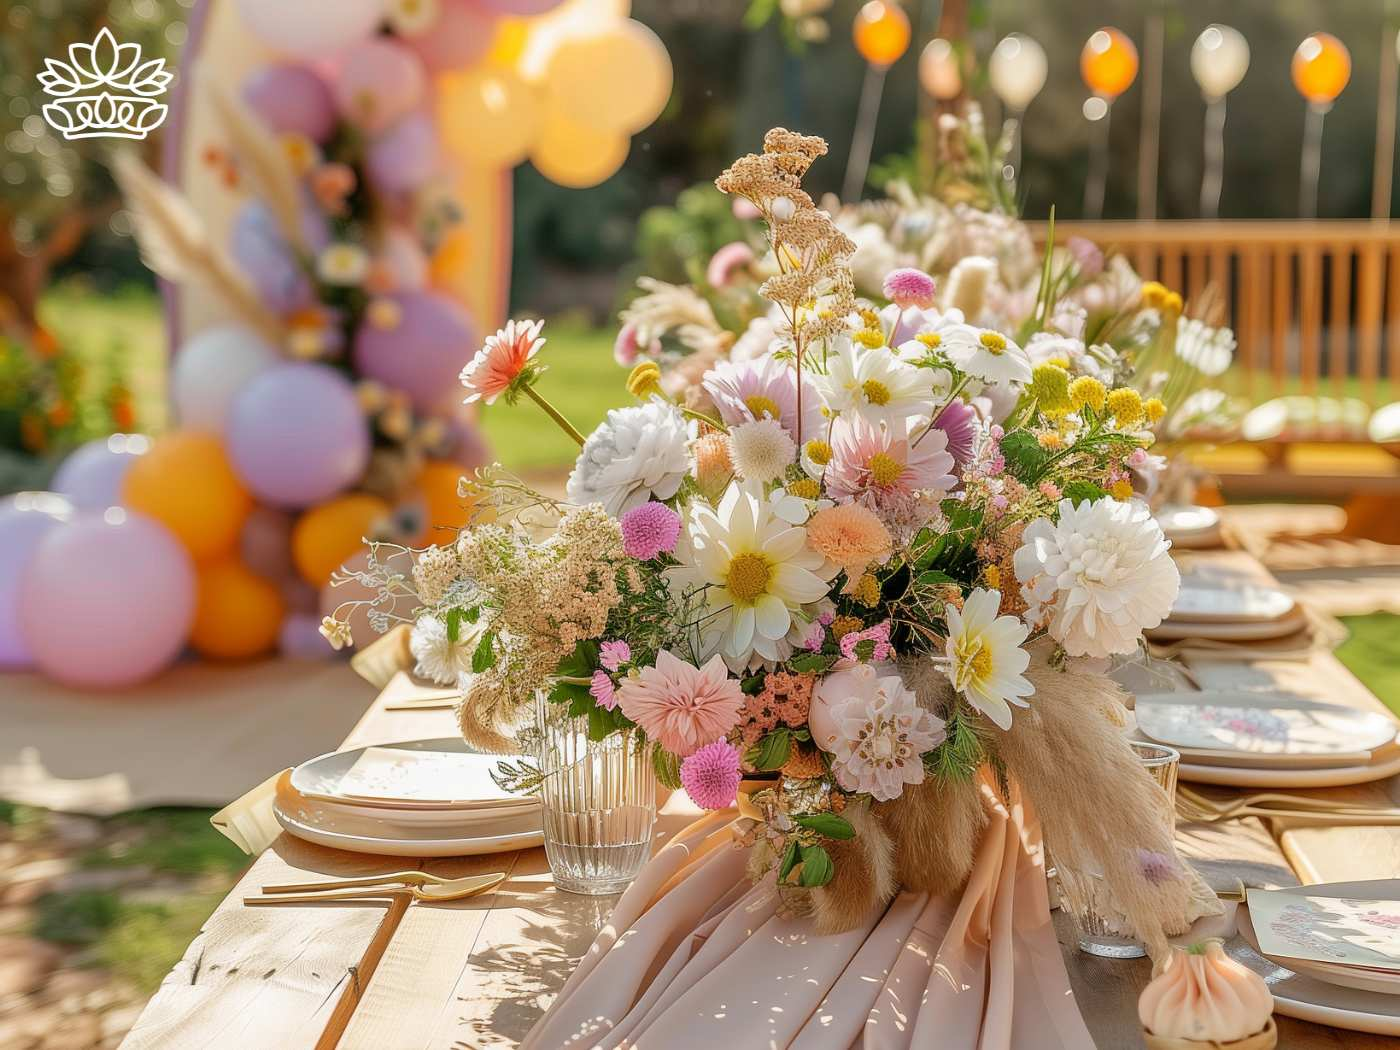 Sumptuous outdoor celebration table setting with a vibrant array of flowers centerpiece, under a canopy of fairy lights, embodying the essence of Fabulous Flowers and Gifts.